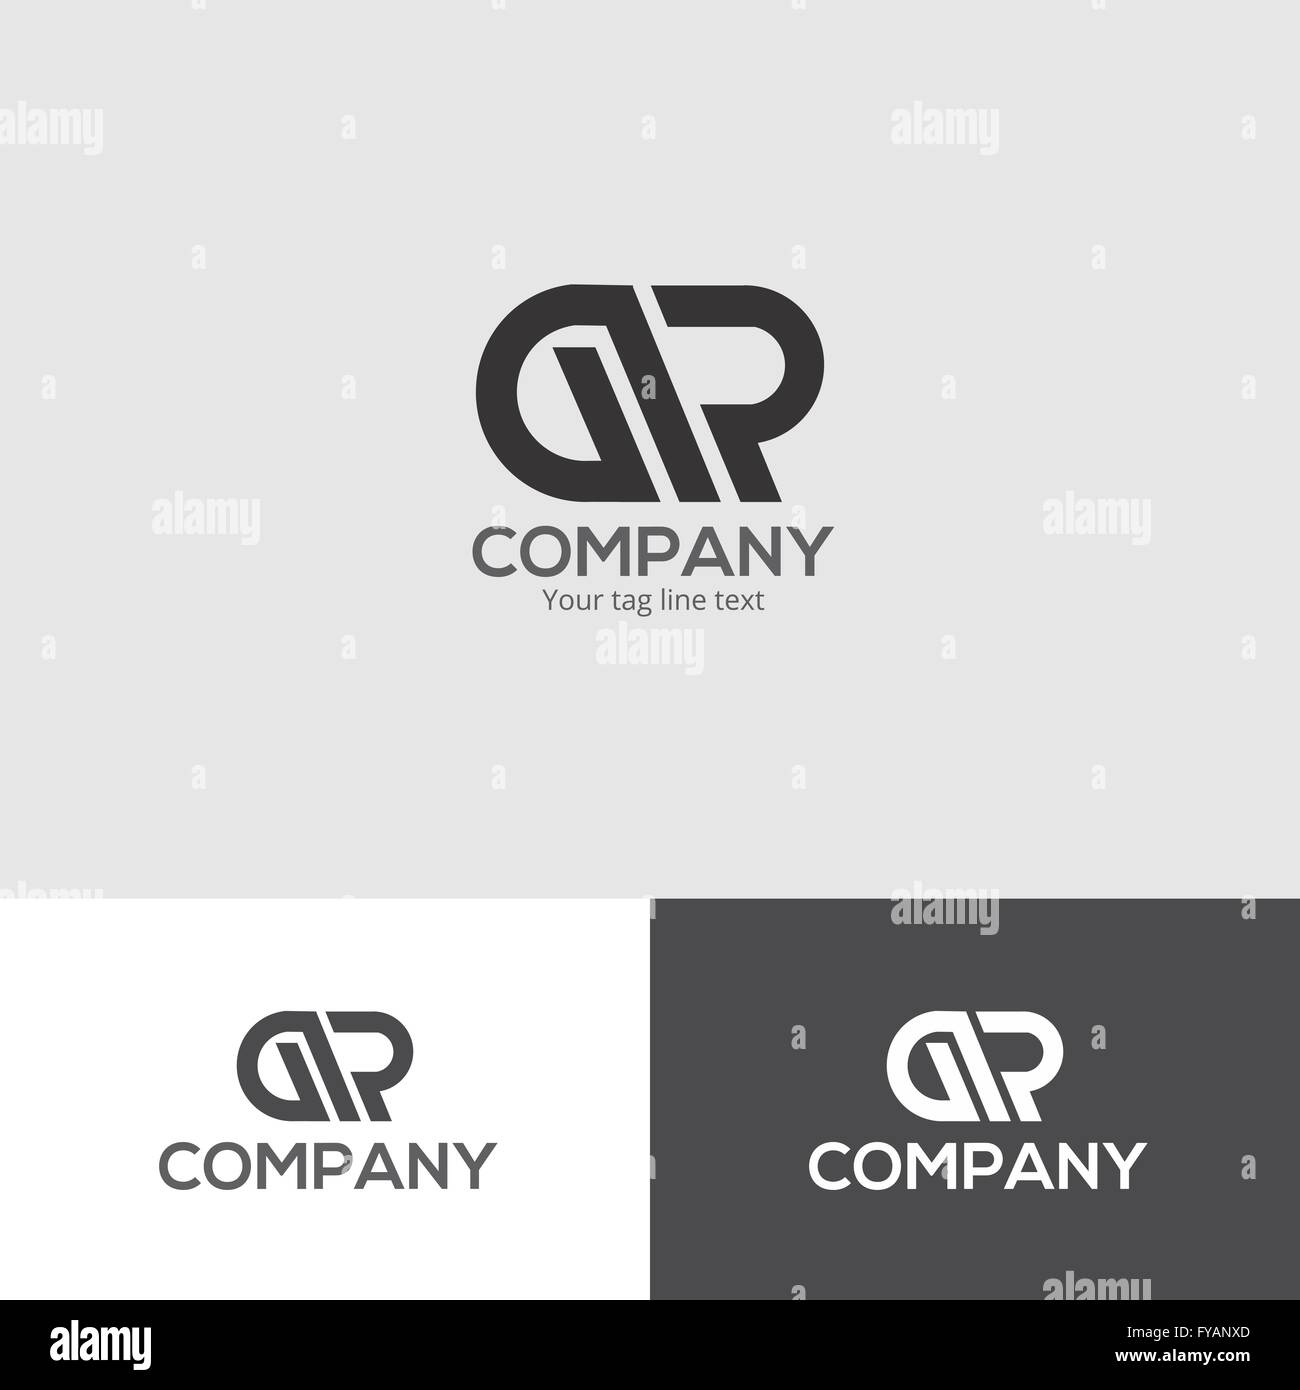 Creative Corporate Logo Design Template Professional Business Card And Letterhead Design Layout Fully Editable Vector Graphics Stock Vector Image Art Alamy